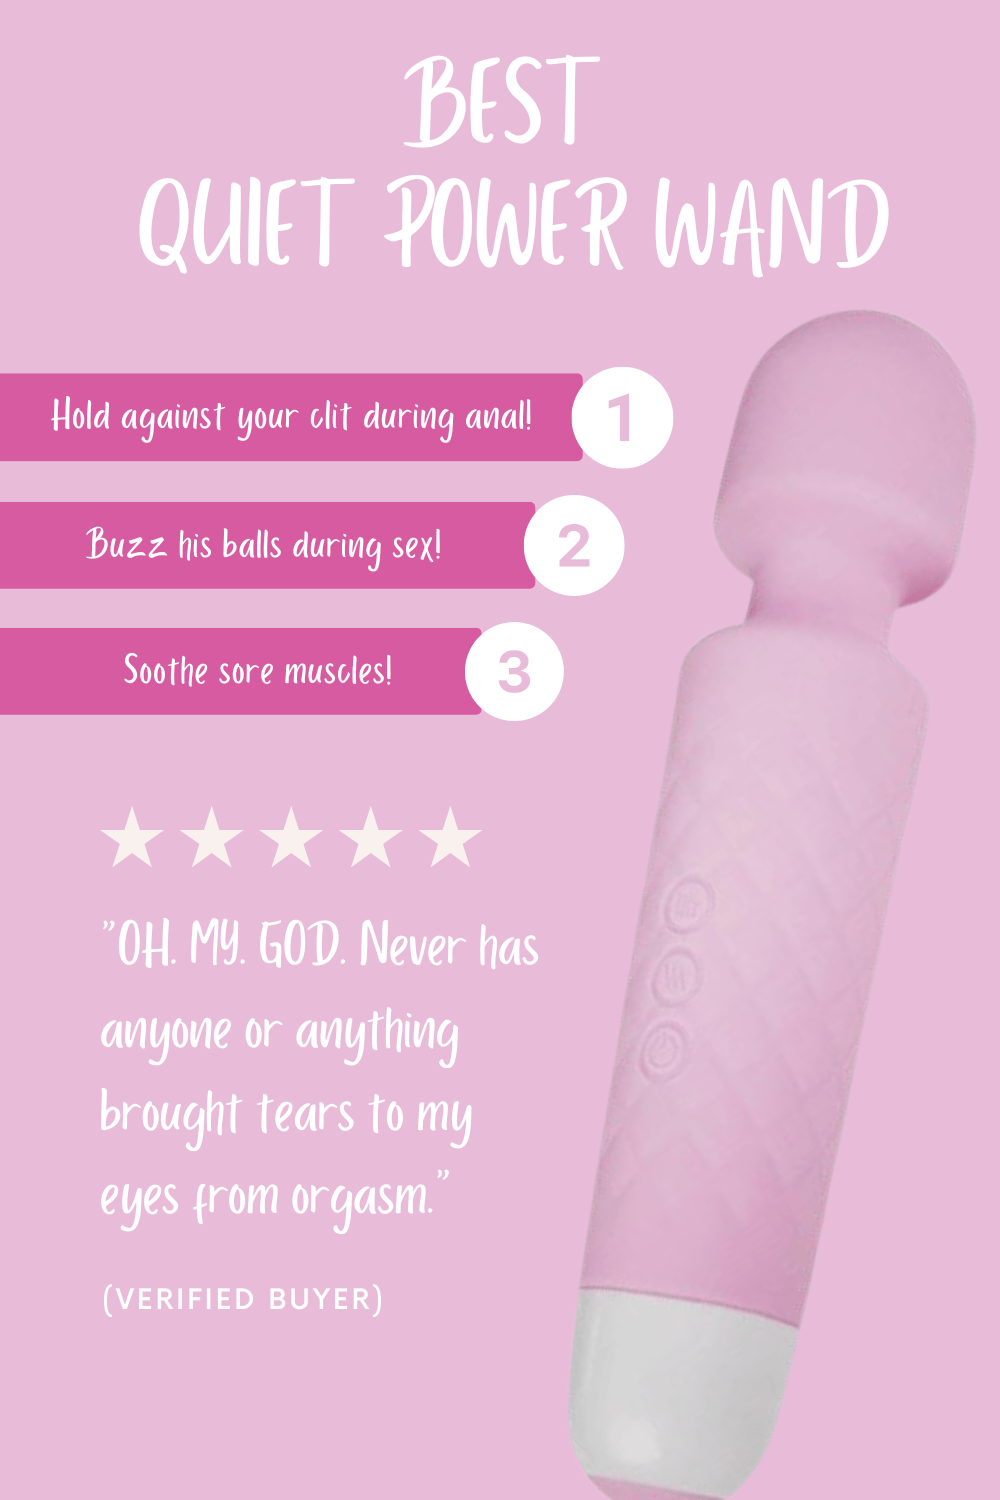 Best quiet power wand. Hold against your clit during anal. Buzz his balls during sex. Soothe sore muscles. Five stars oh. my. god. Never has anyone or anything brought tears to my eyes from orgasm.